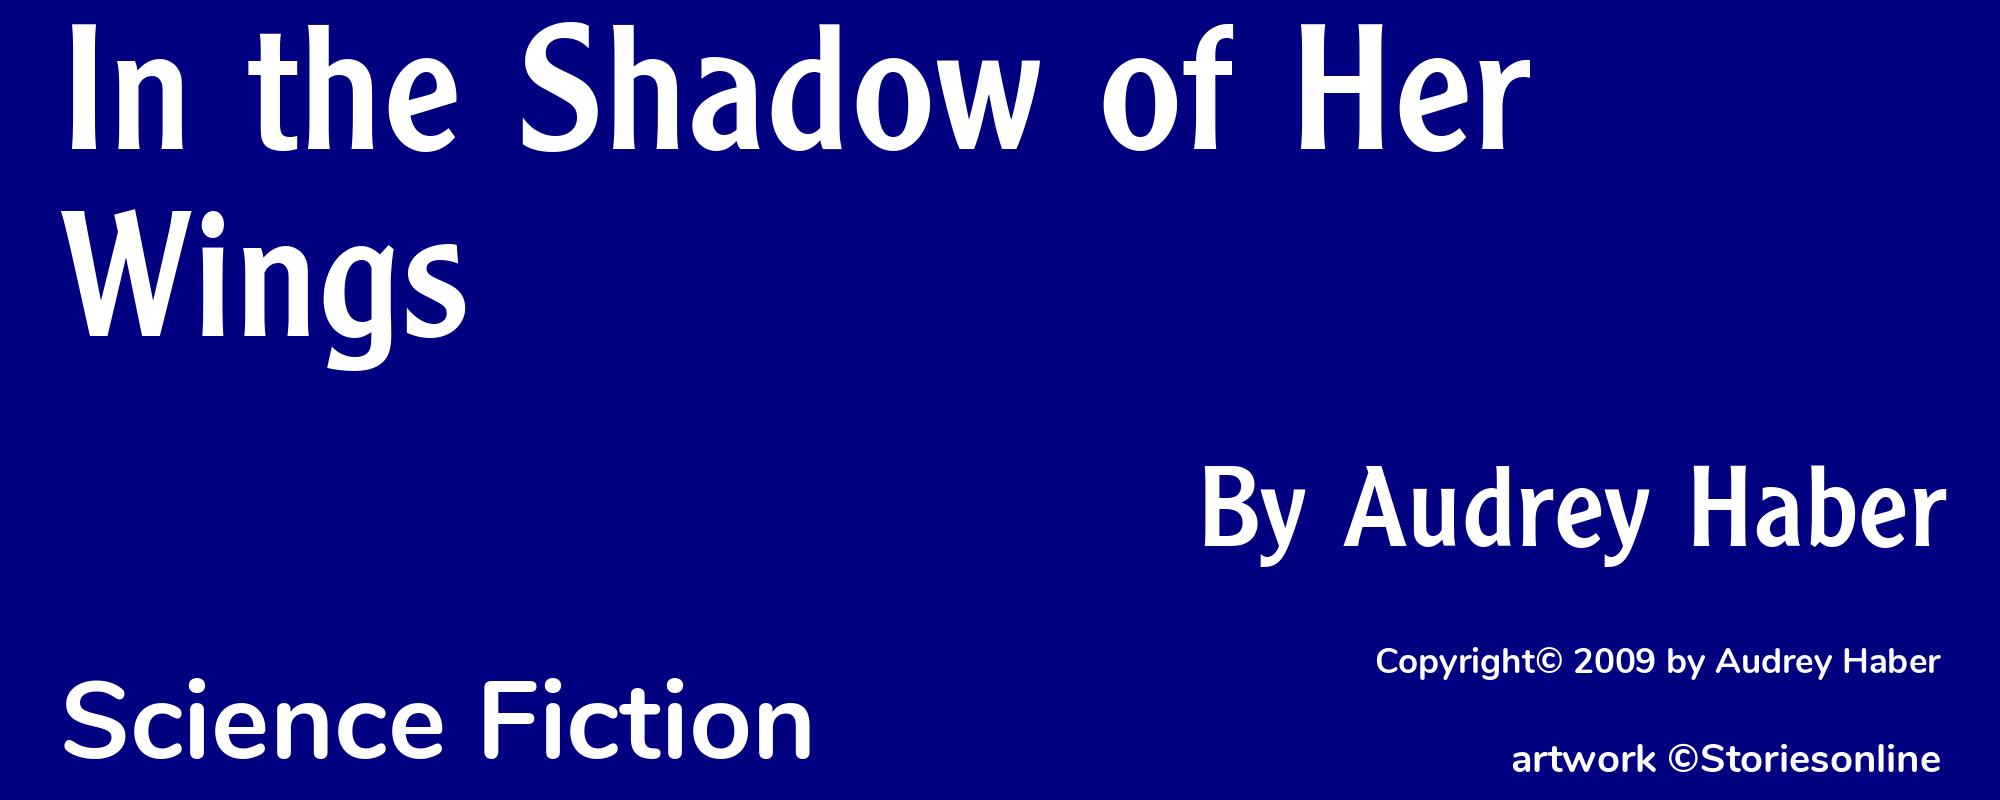 In the Shadow of Her Wings - Cover